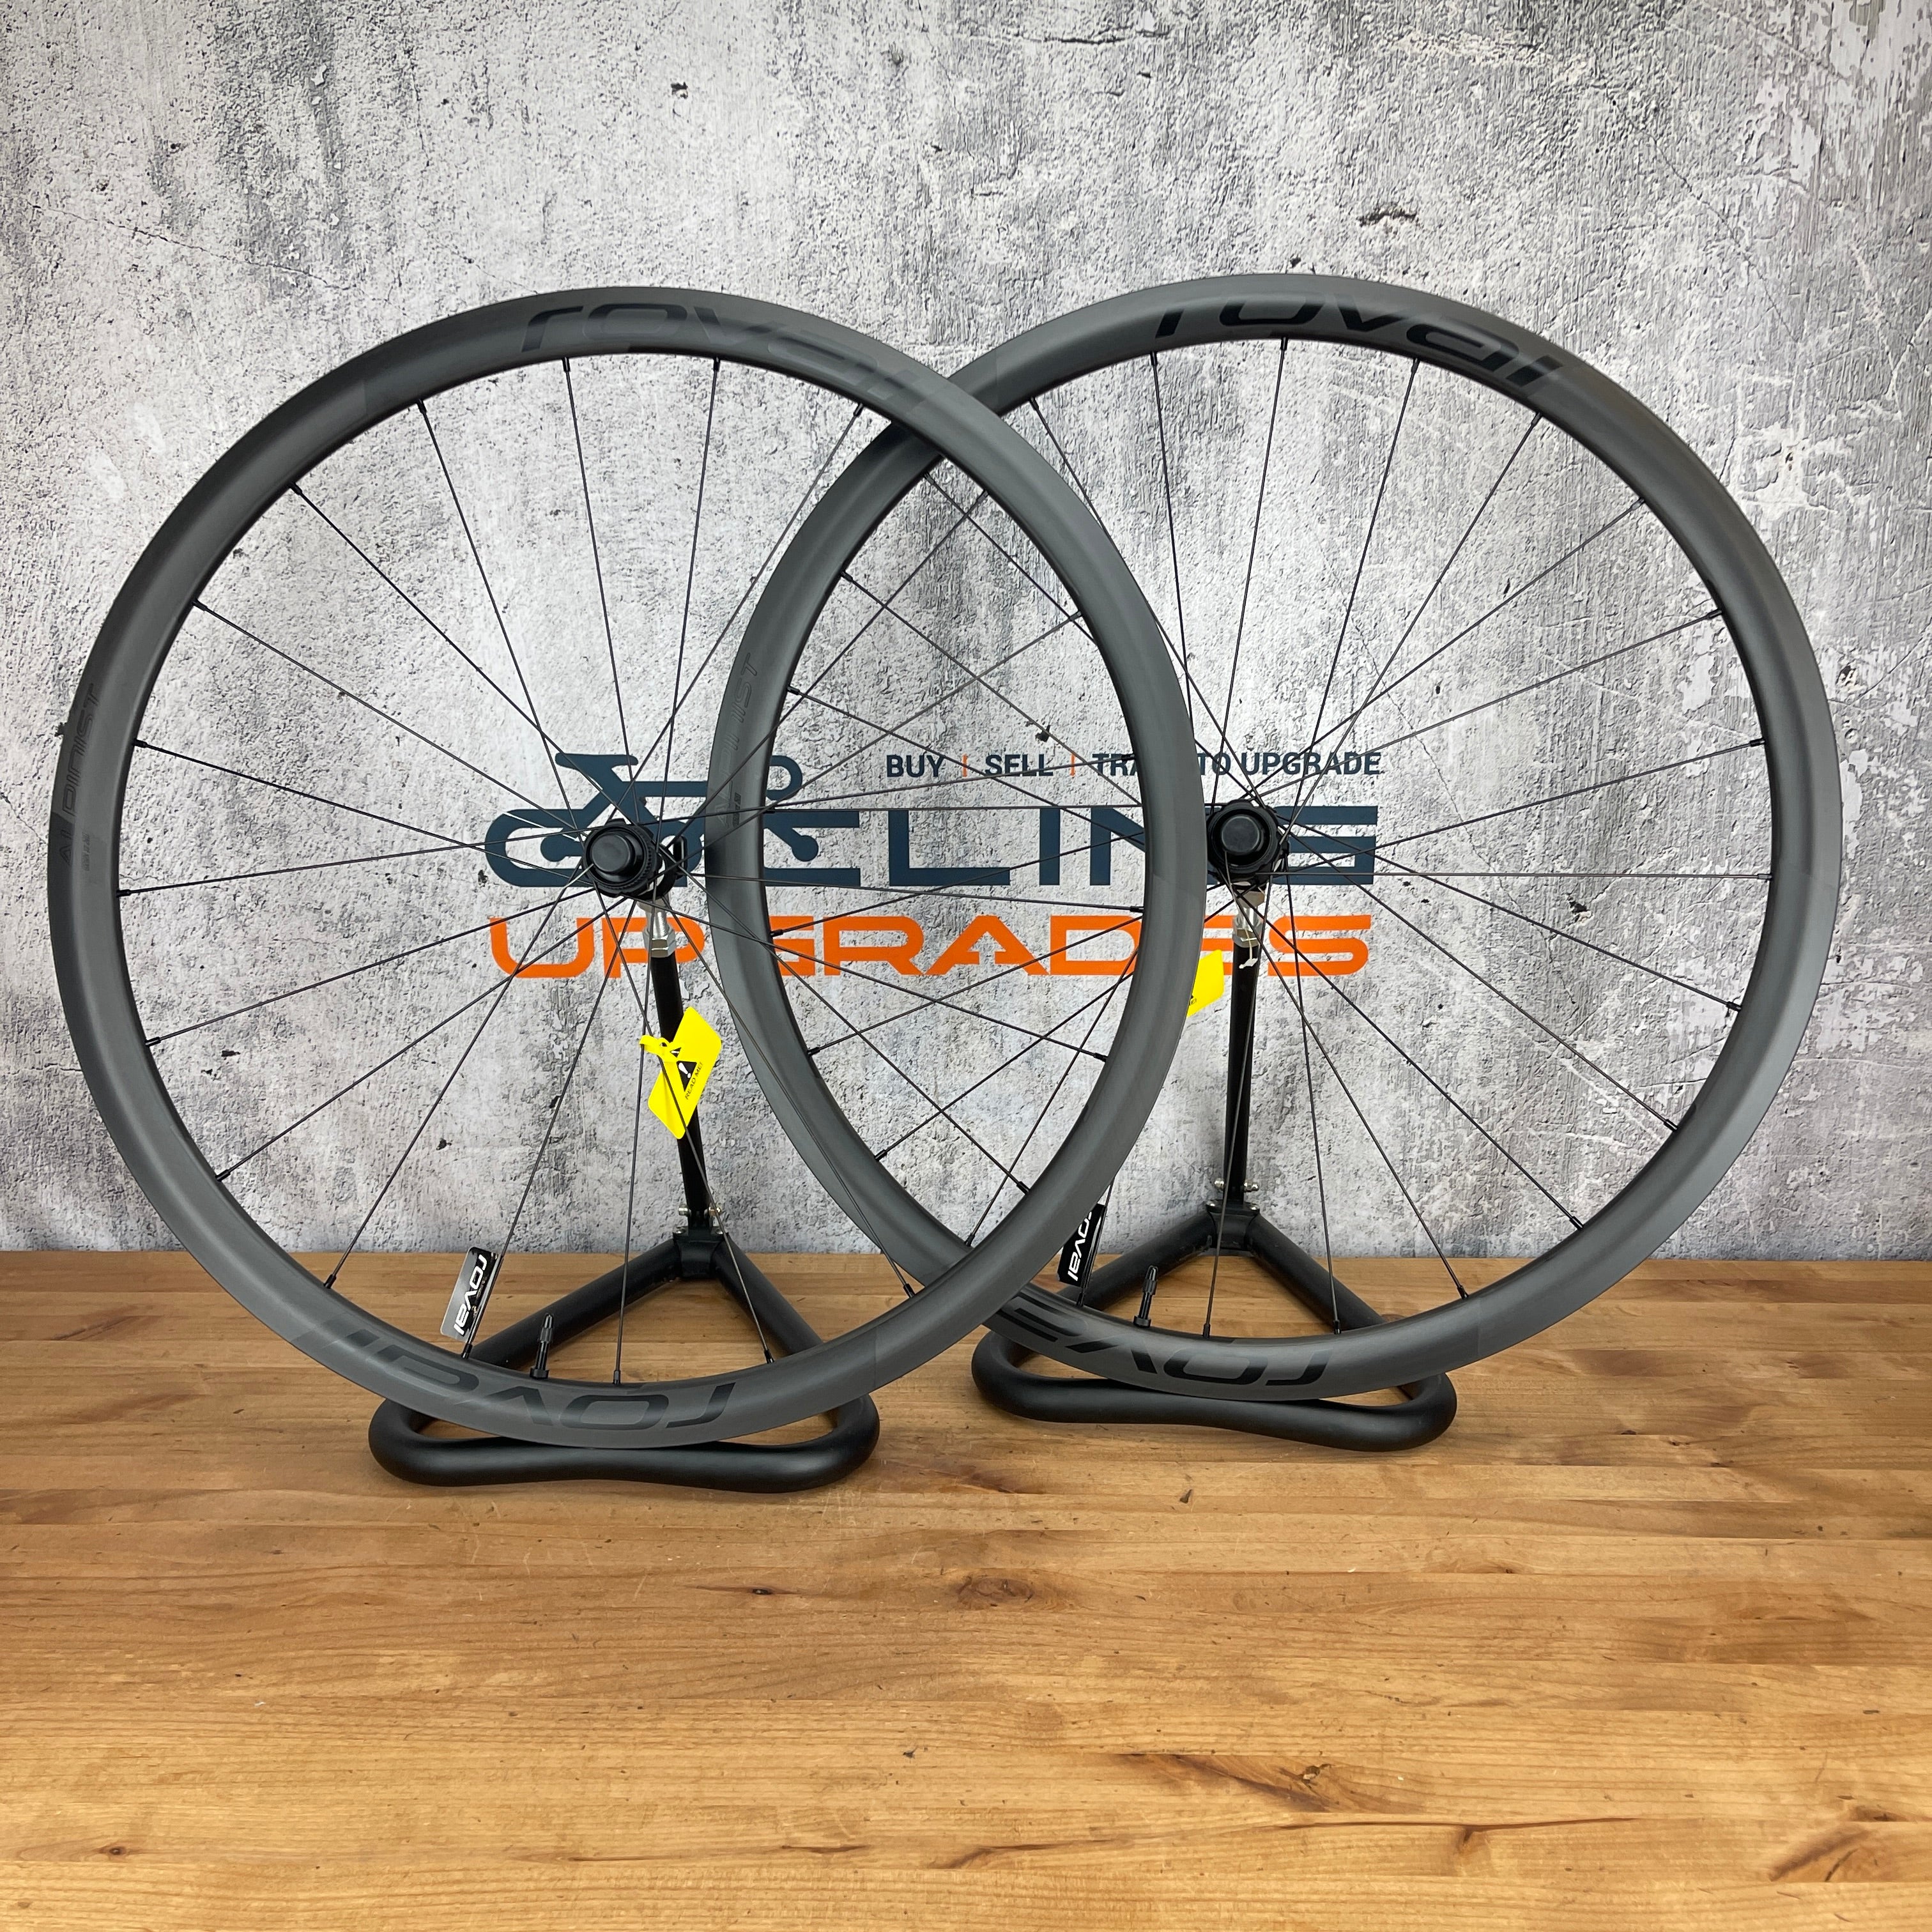 New! Roval Alpinist CL II Carbon Tubeless Wheelset 700c Disc Brake